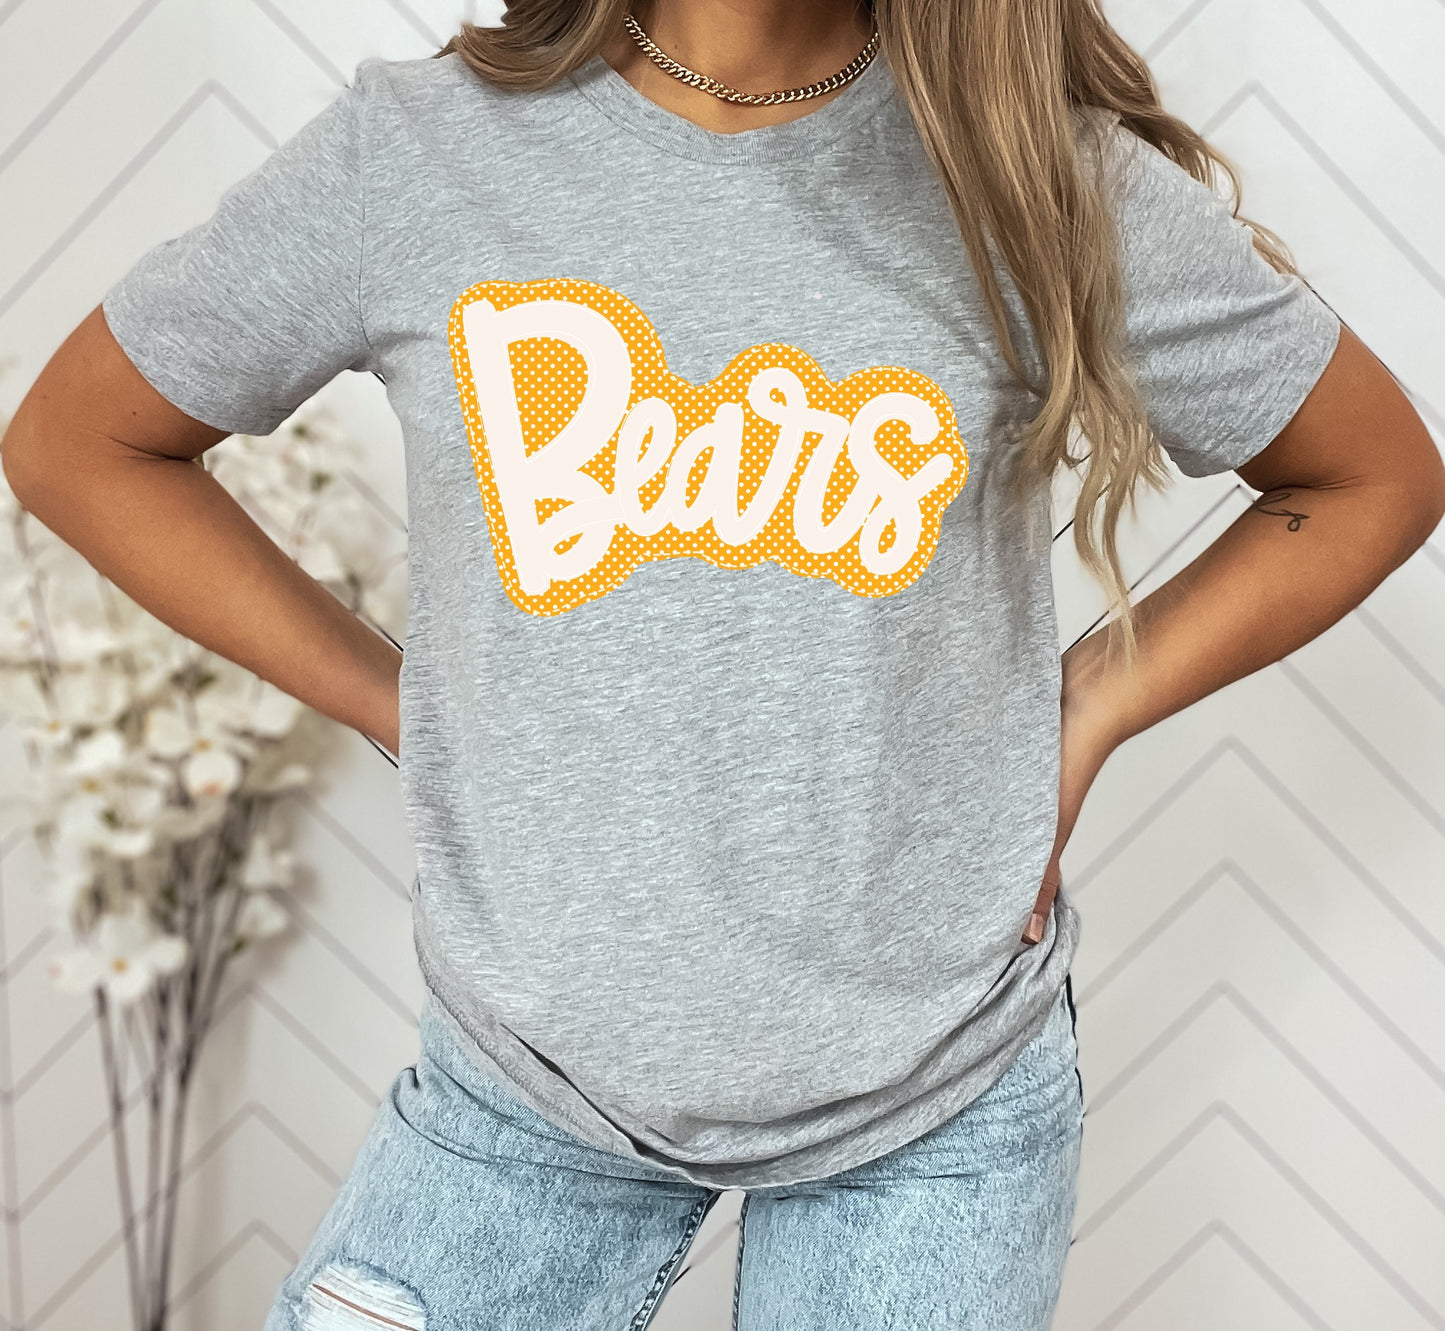 Bears Faux Applique Graphic Tee